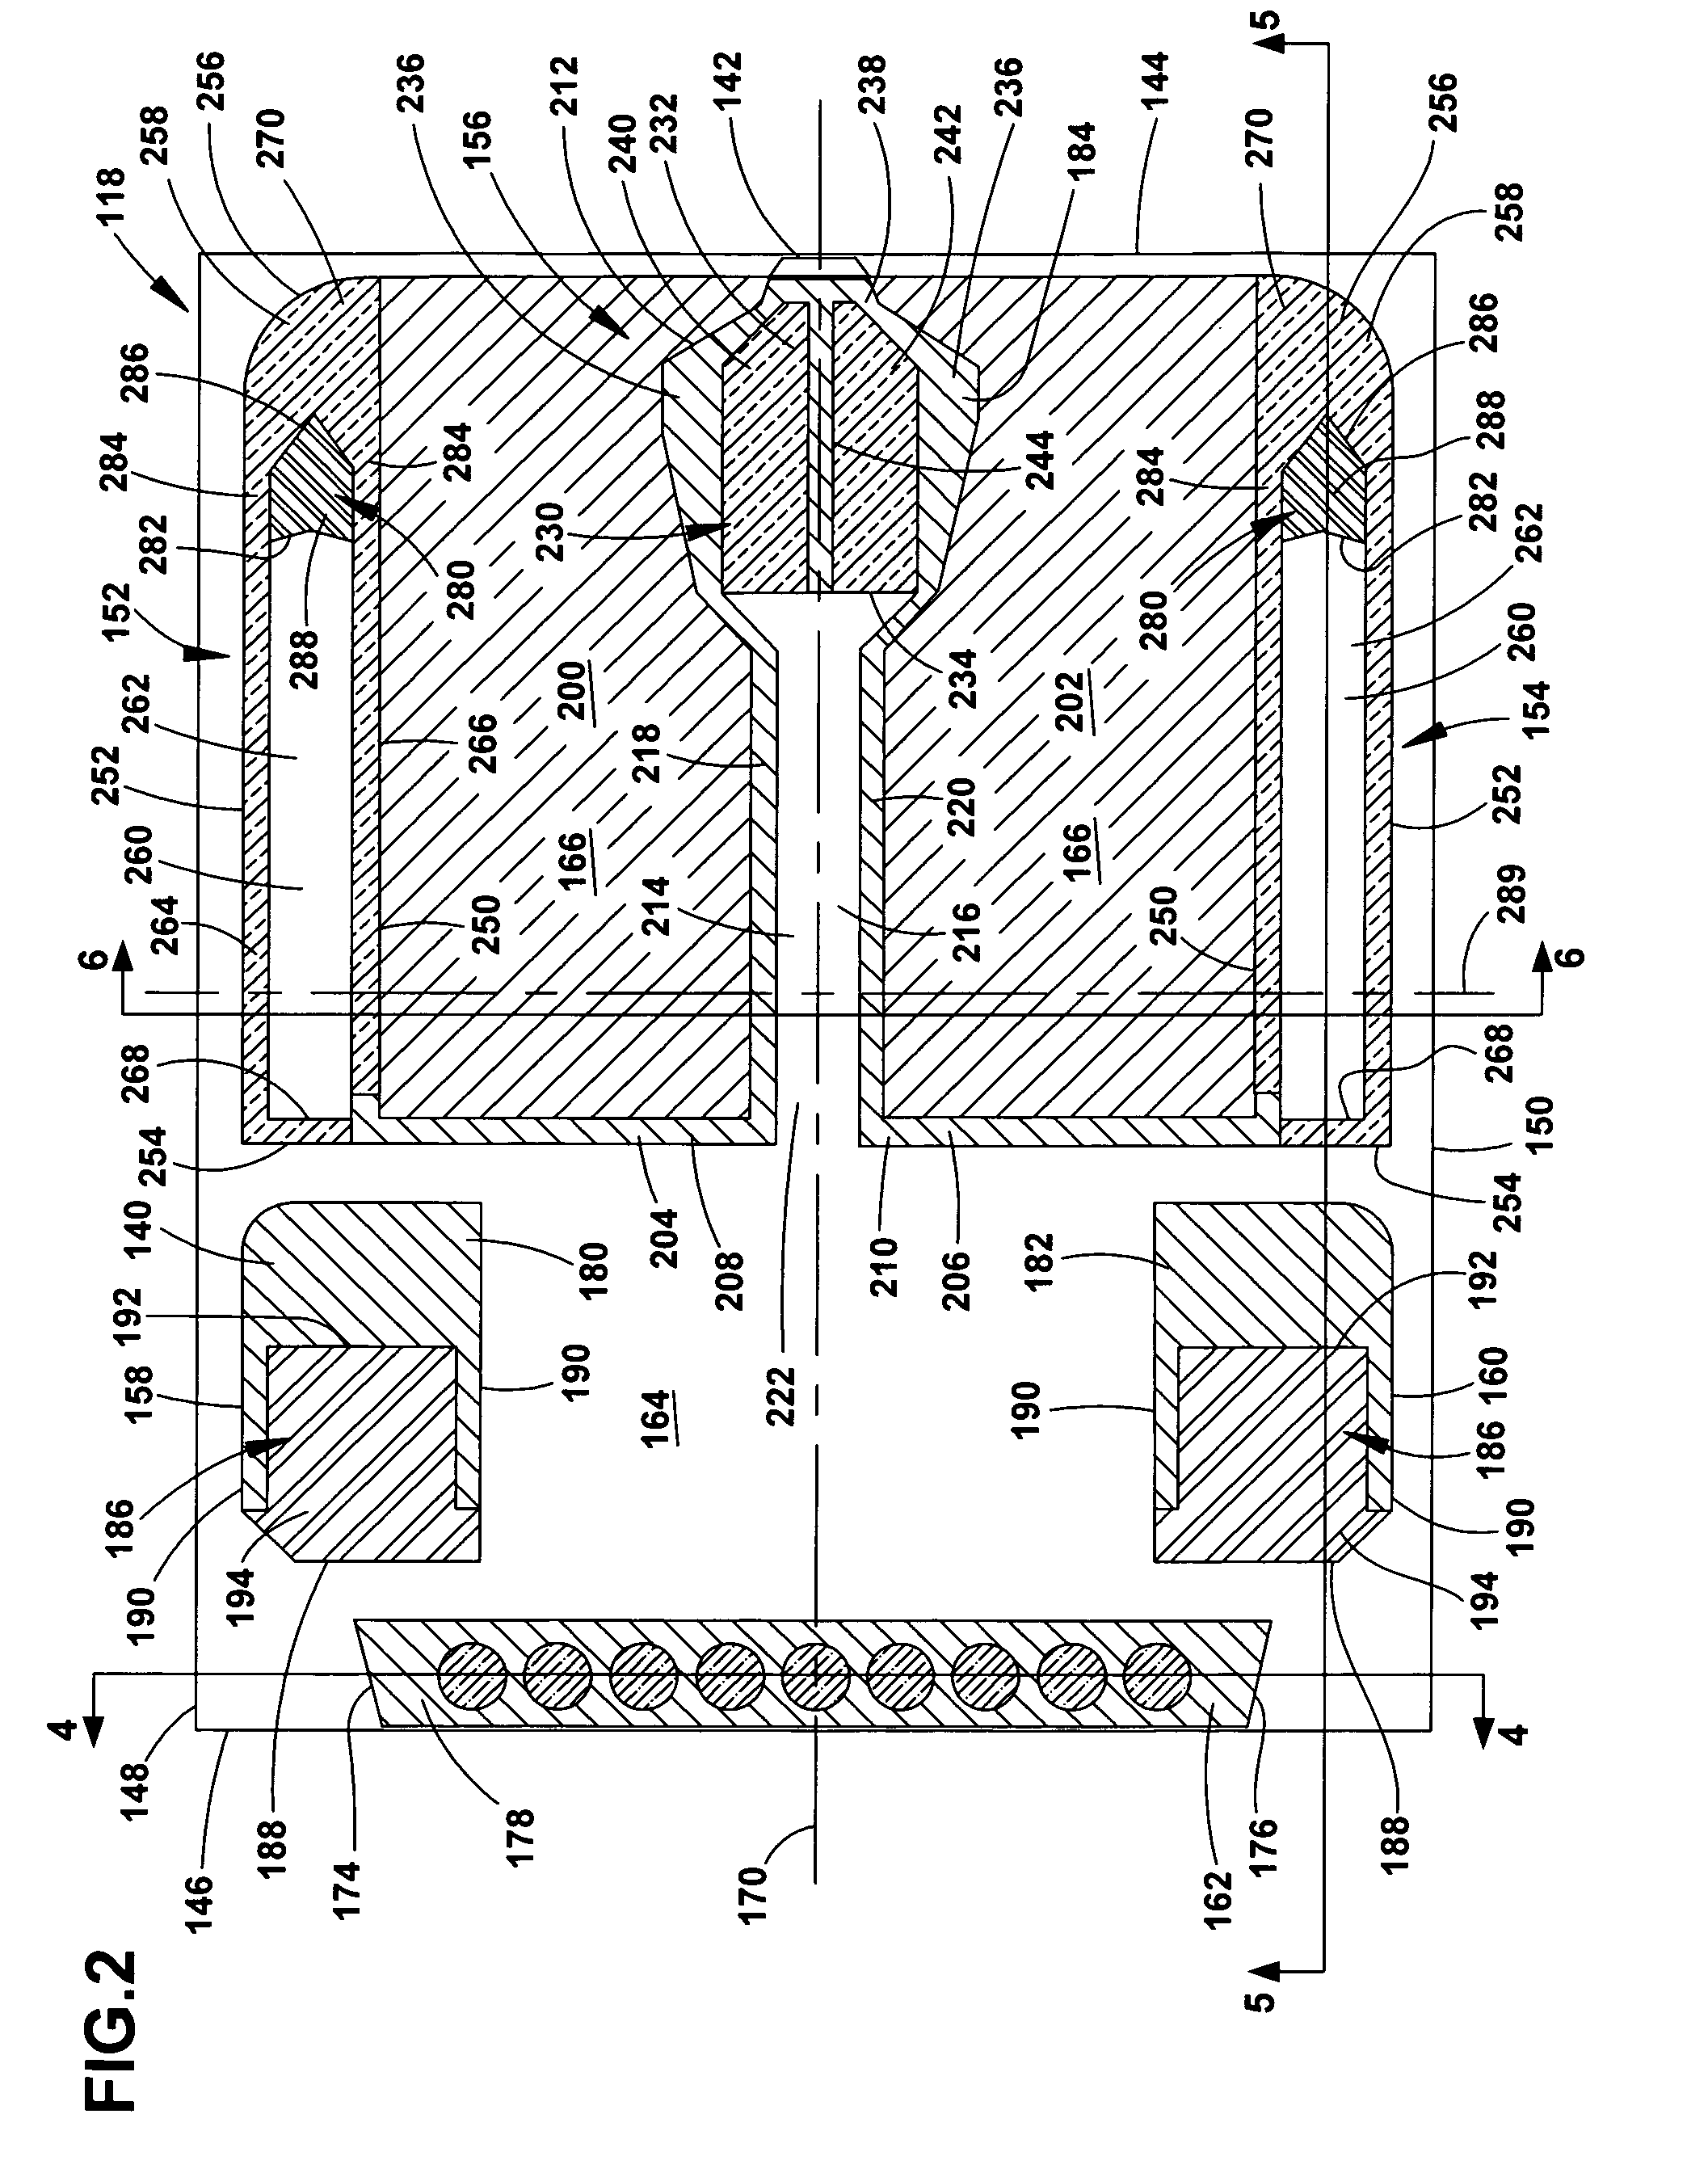 Slider configured for rapid bearing stabilization during ramp load operations